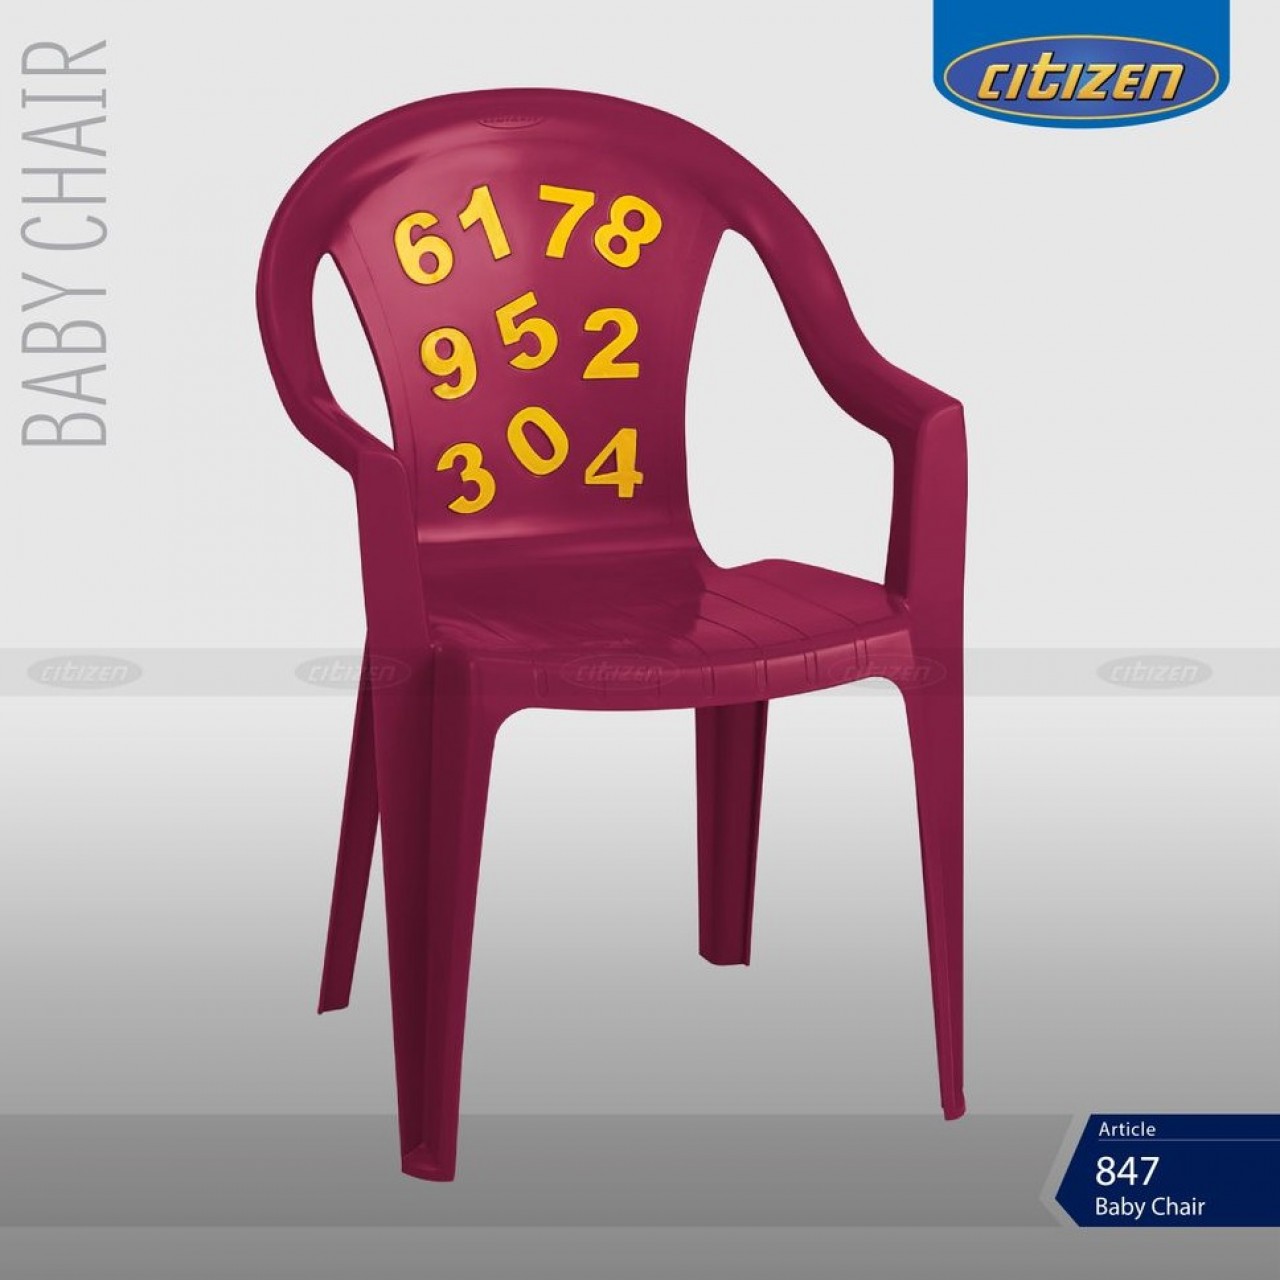 Citizen 847 Plastic Baby Chair - 123 Numbered Furniture For Kids